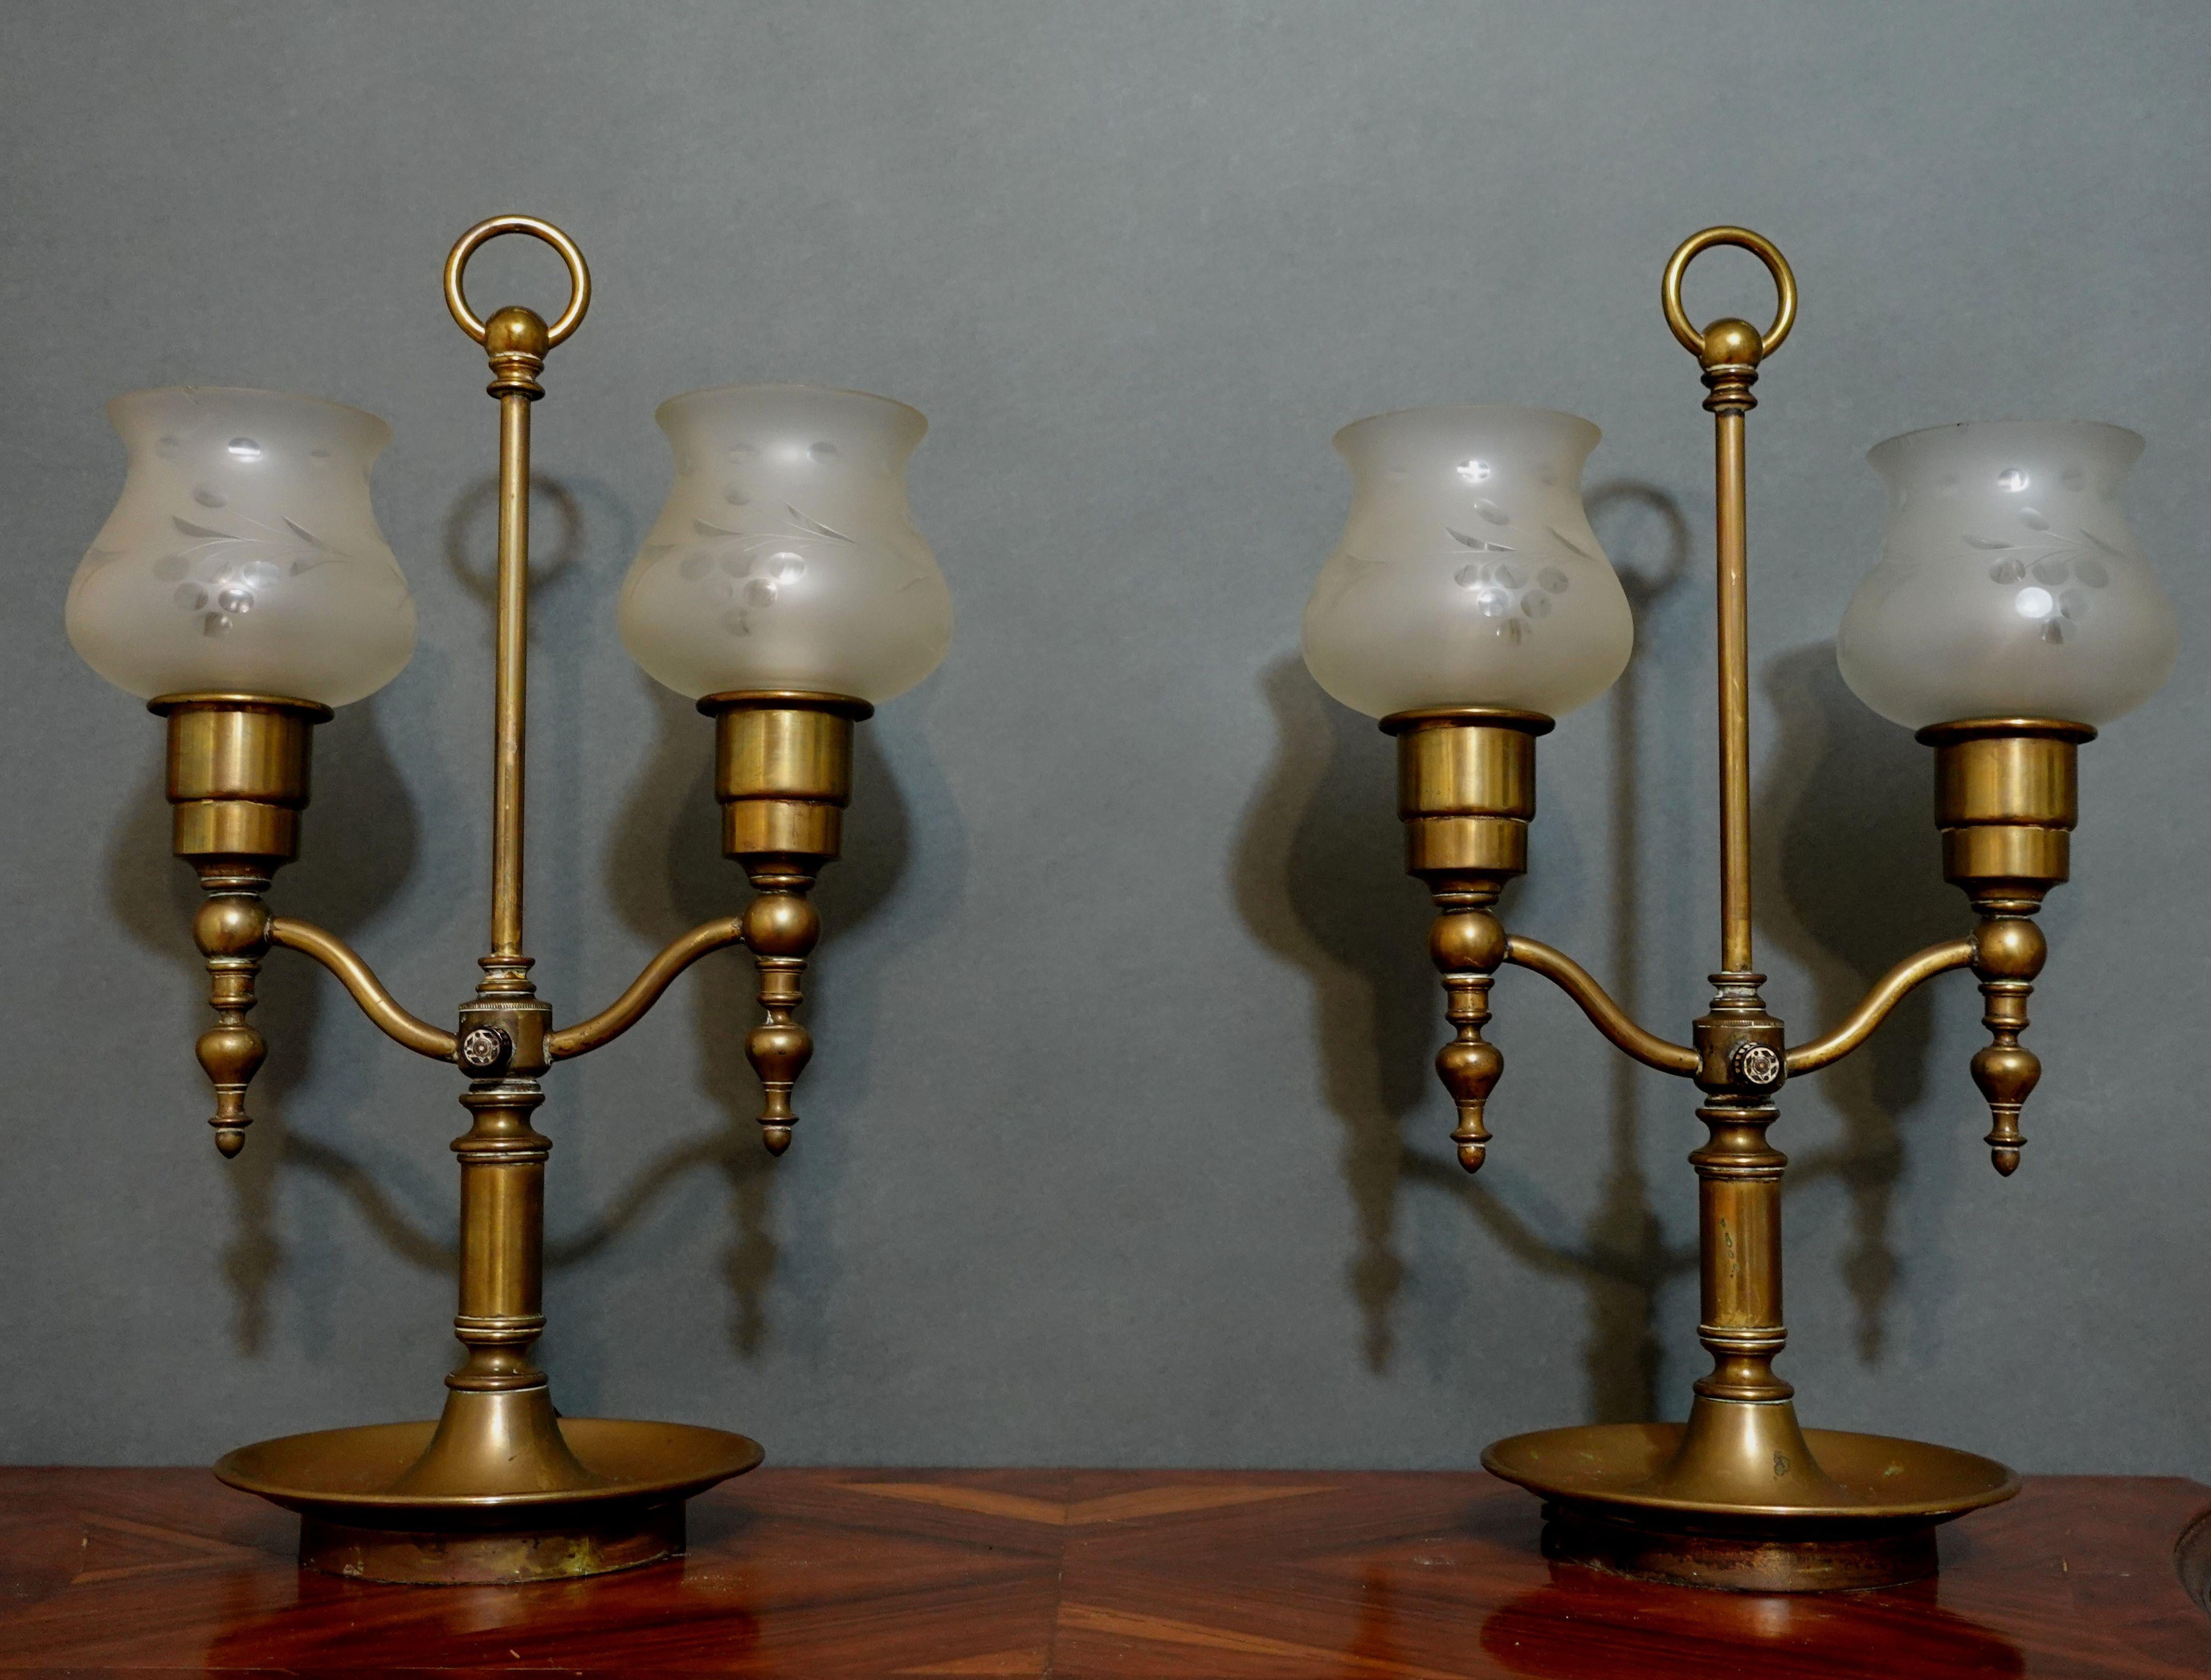 Selling the beautiful antique, pair of large double arm brass hurricane lamps from the late 19th century to the early 20th century. The lamps come with 2 cut glass with flower patterns in the shape of circular forms very elegant, nice